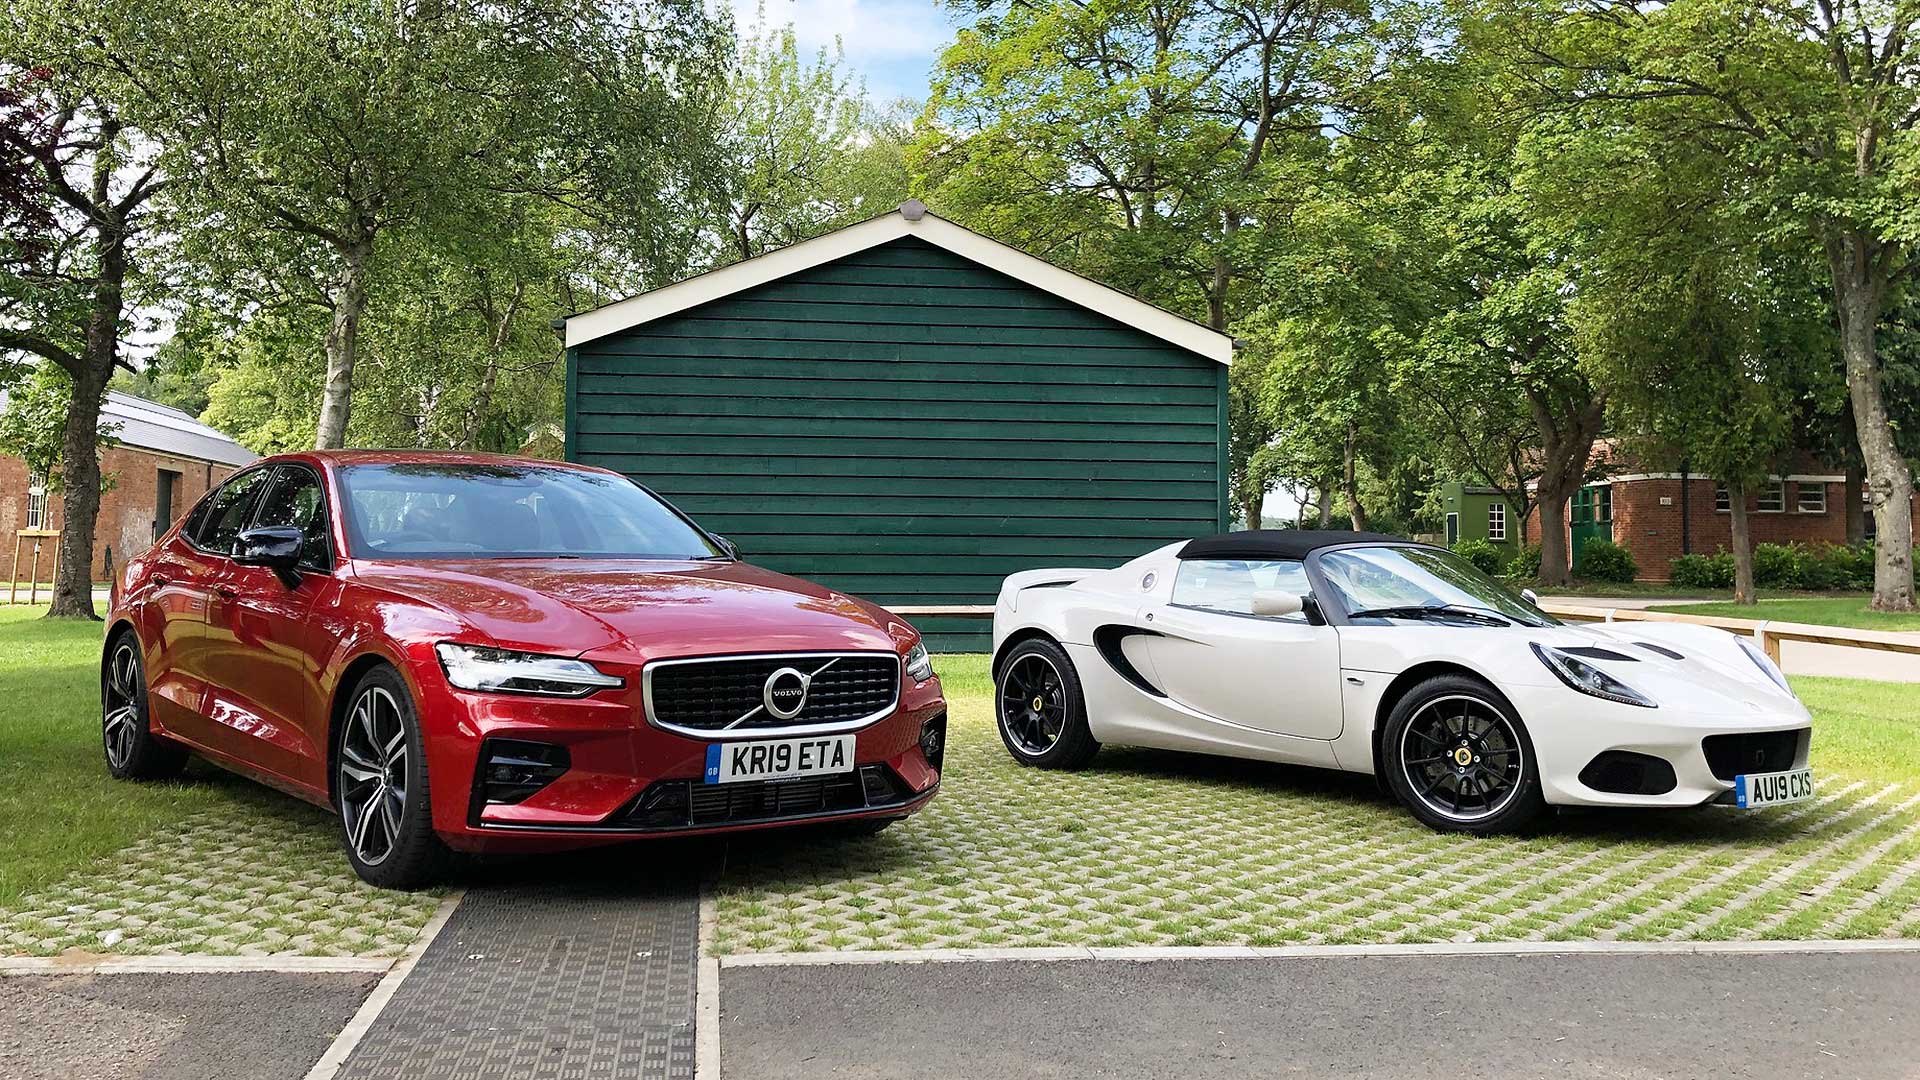 Volvo and Lotus at Bicester Heritage